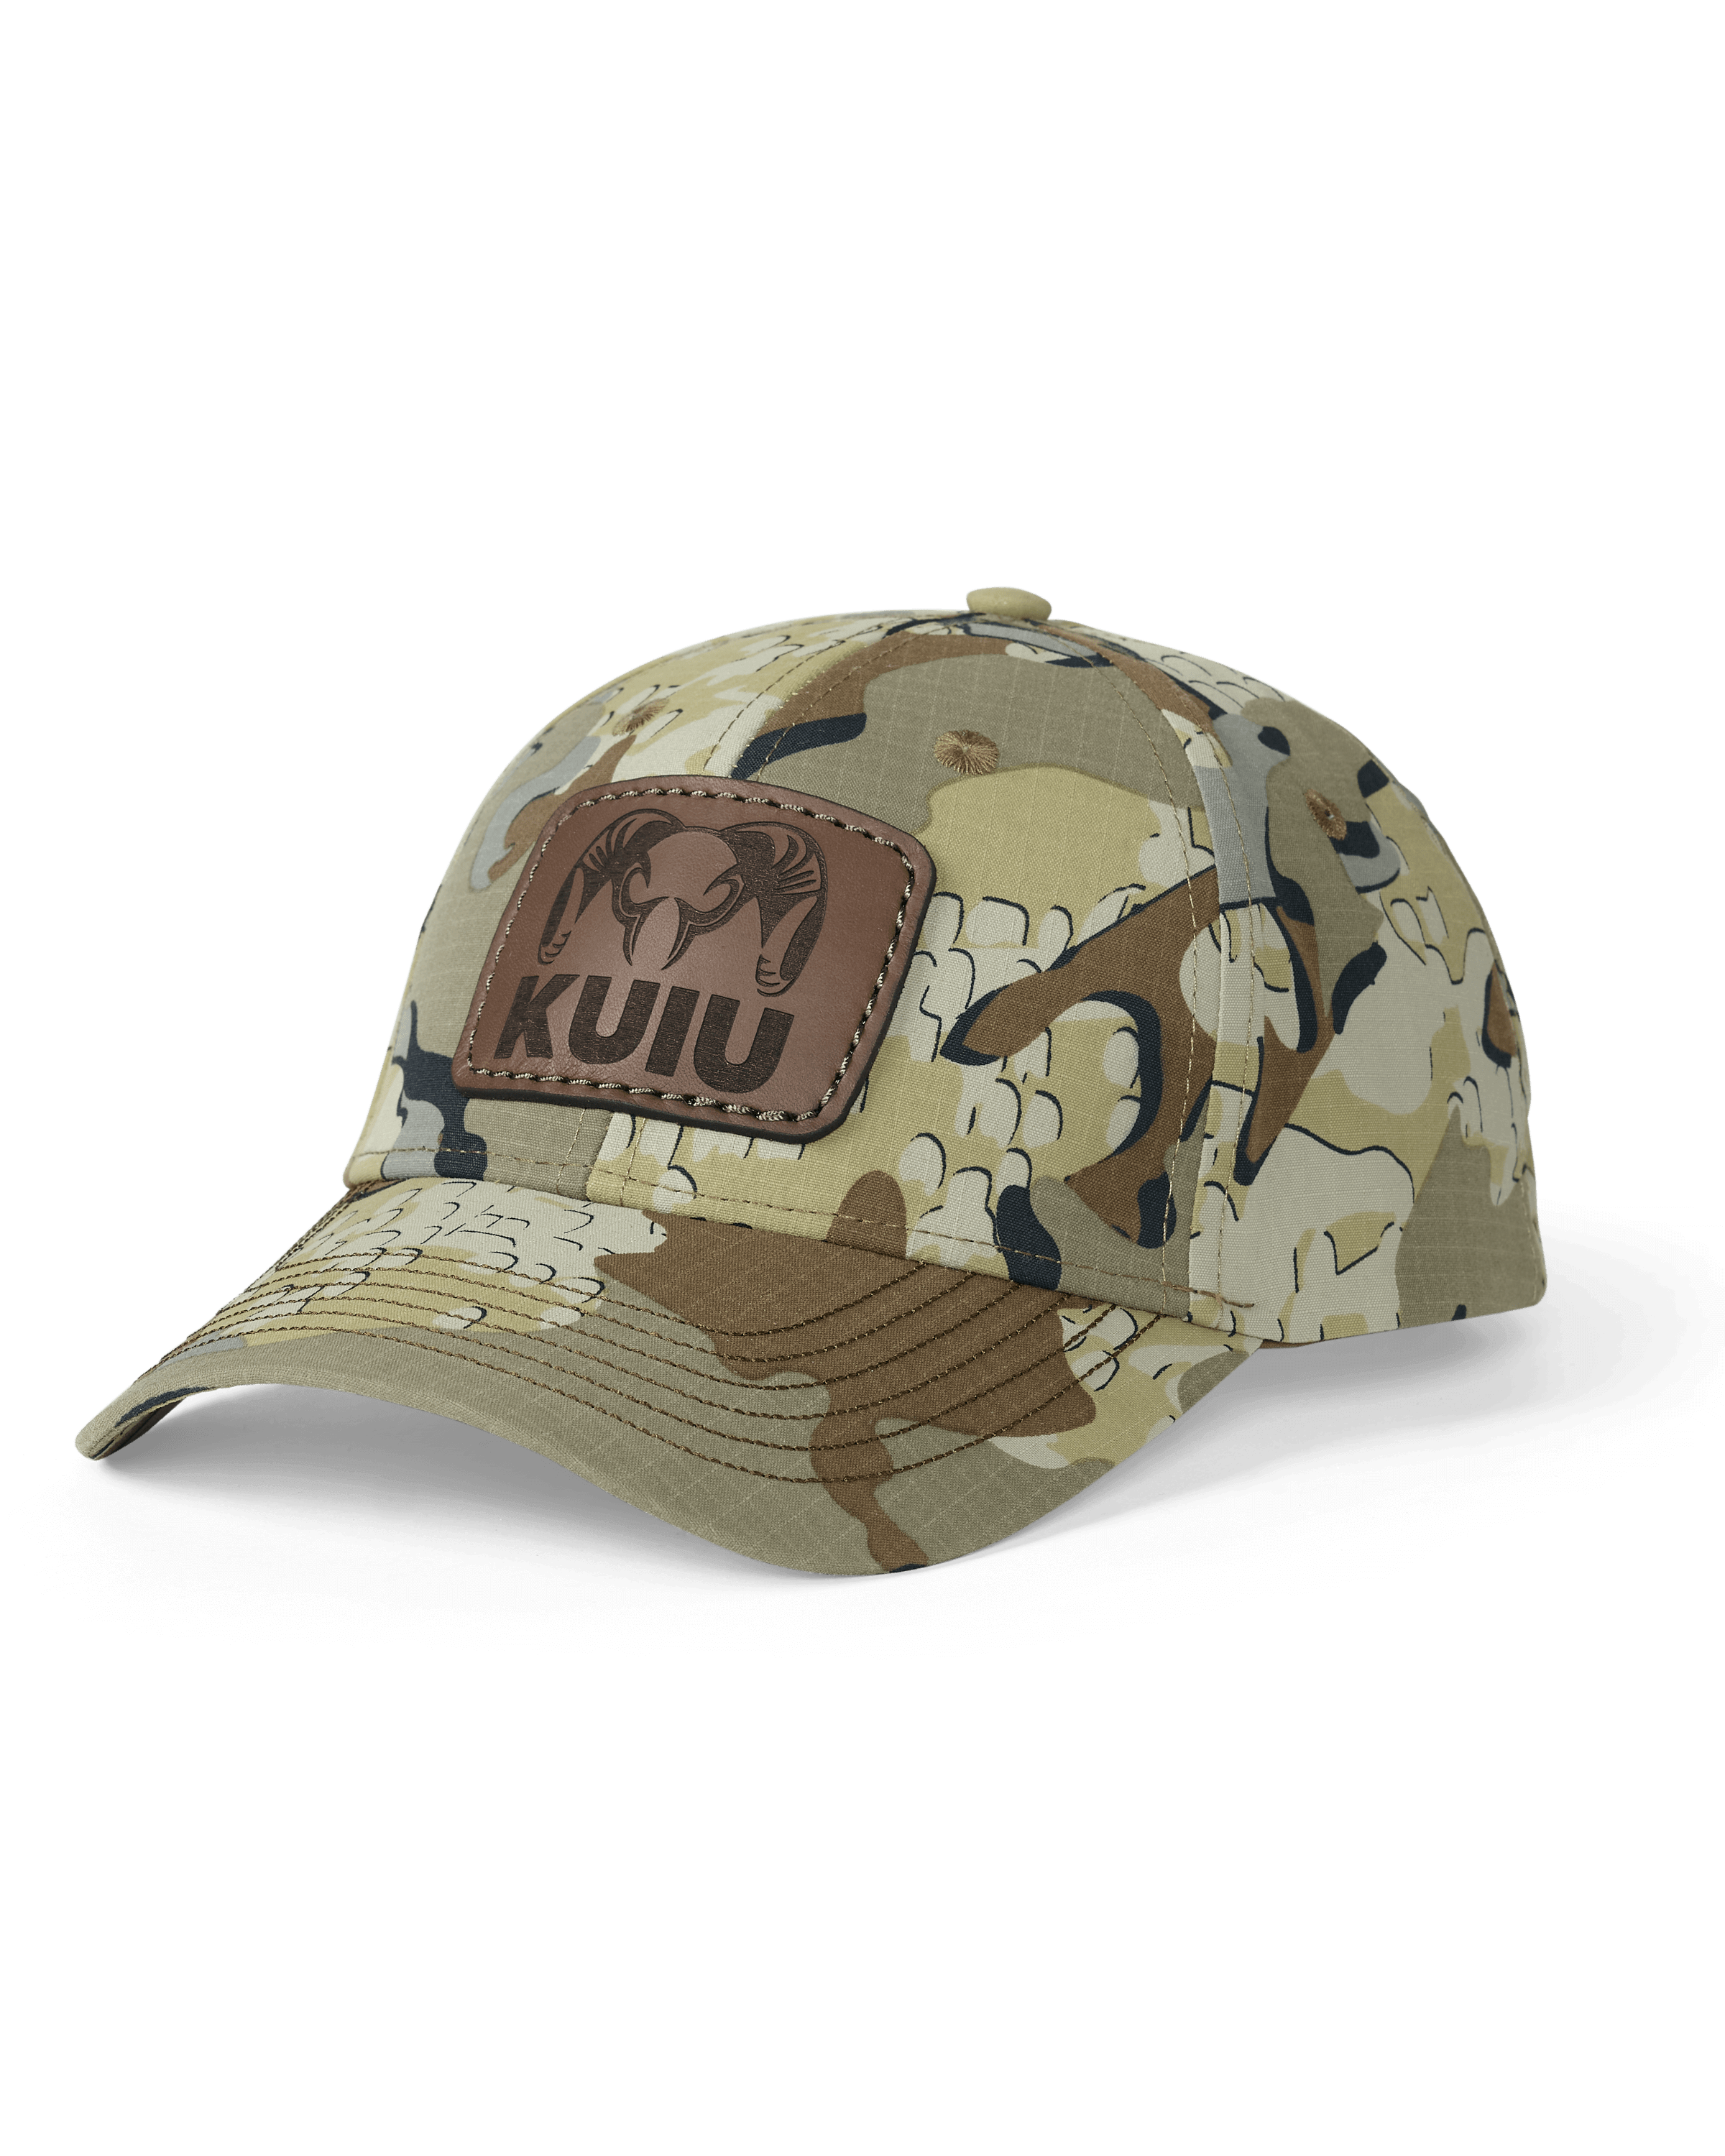 KUIU PRO Leather Patch Hat in Valo